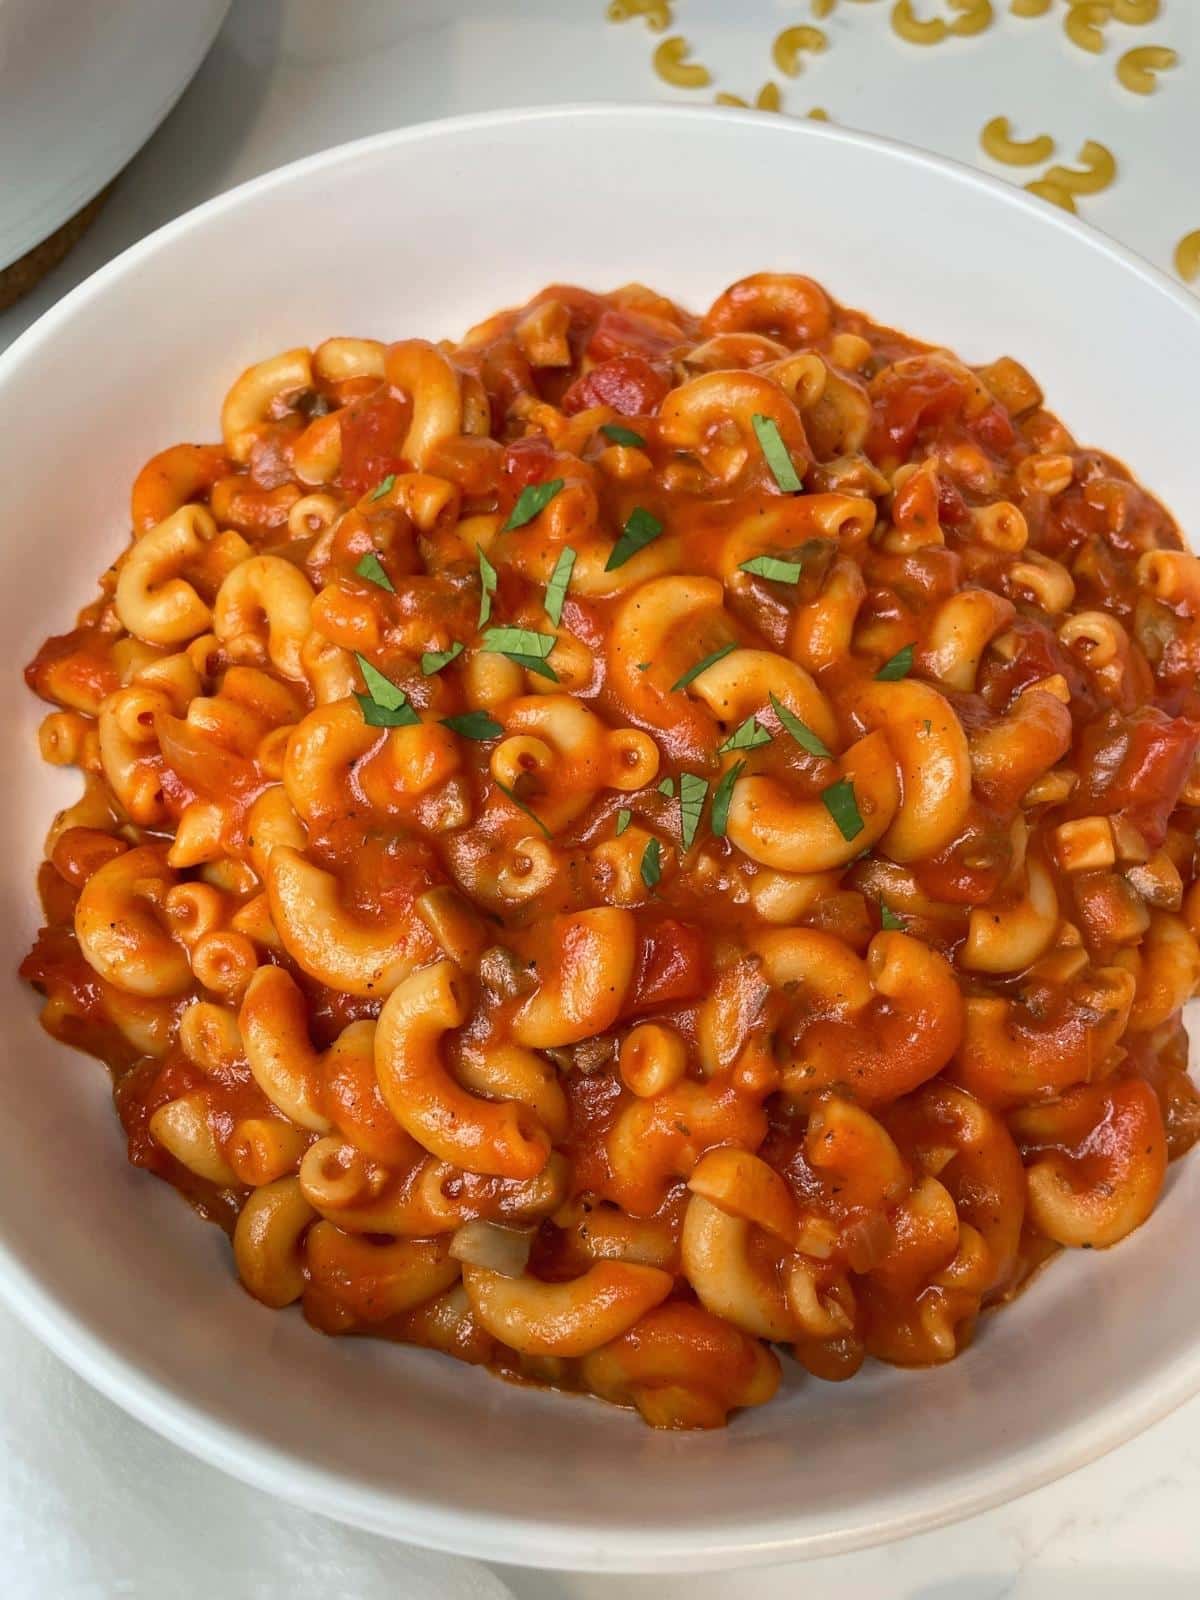 Goulash in a large bowl.